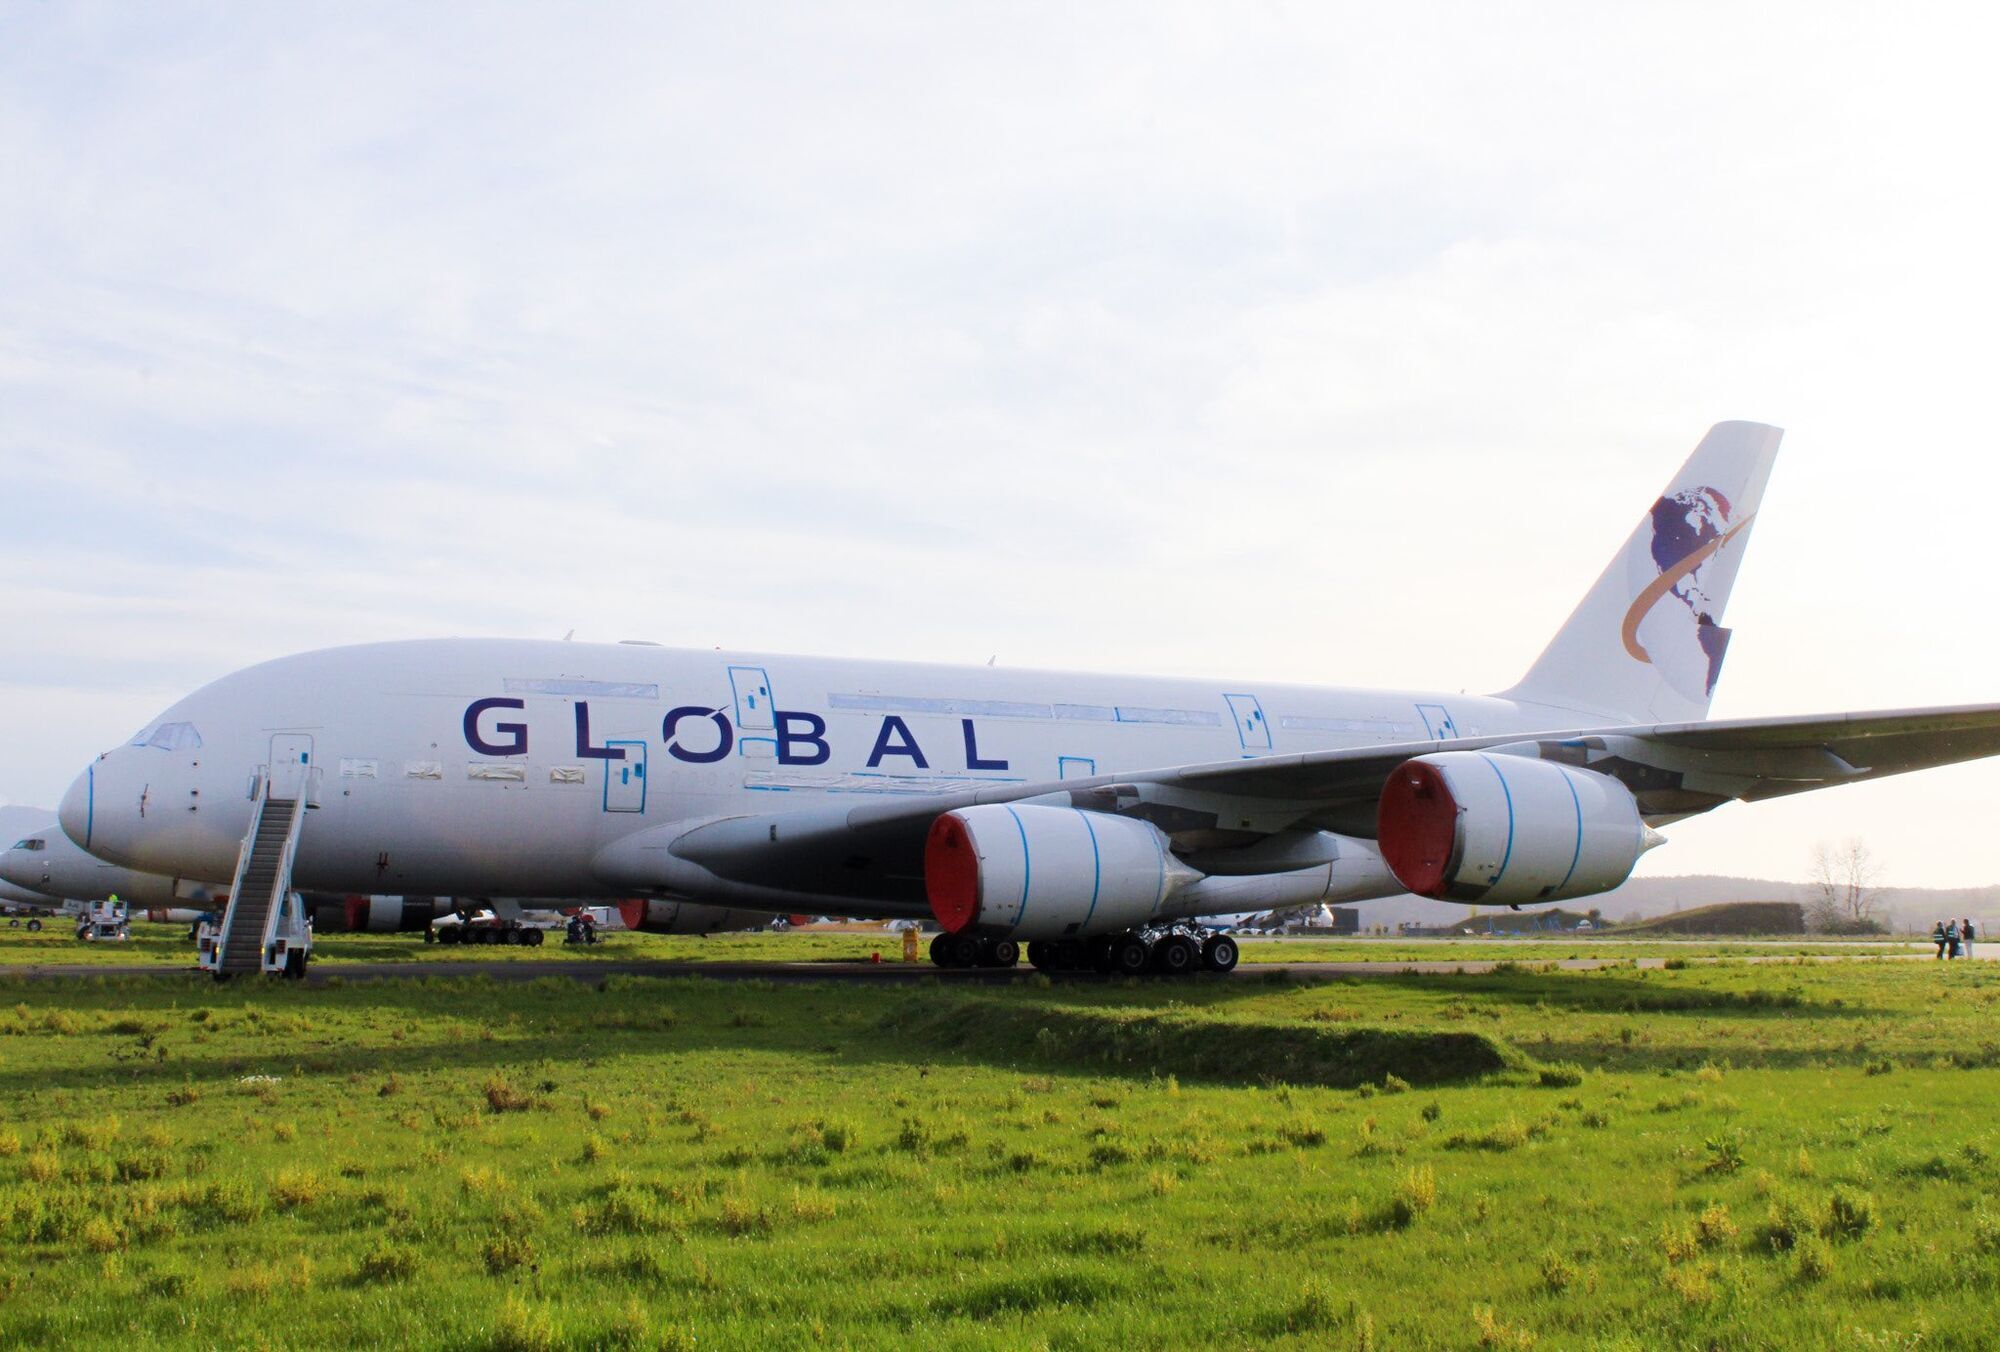 British startup Global Airlines has received its first aircraft